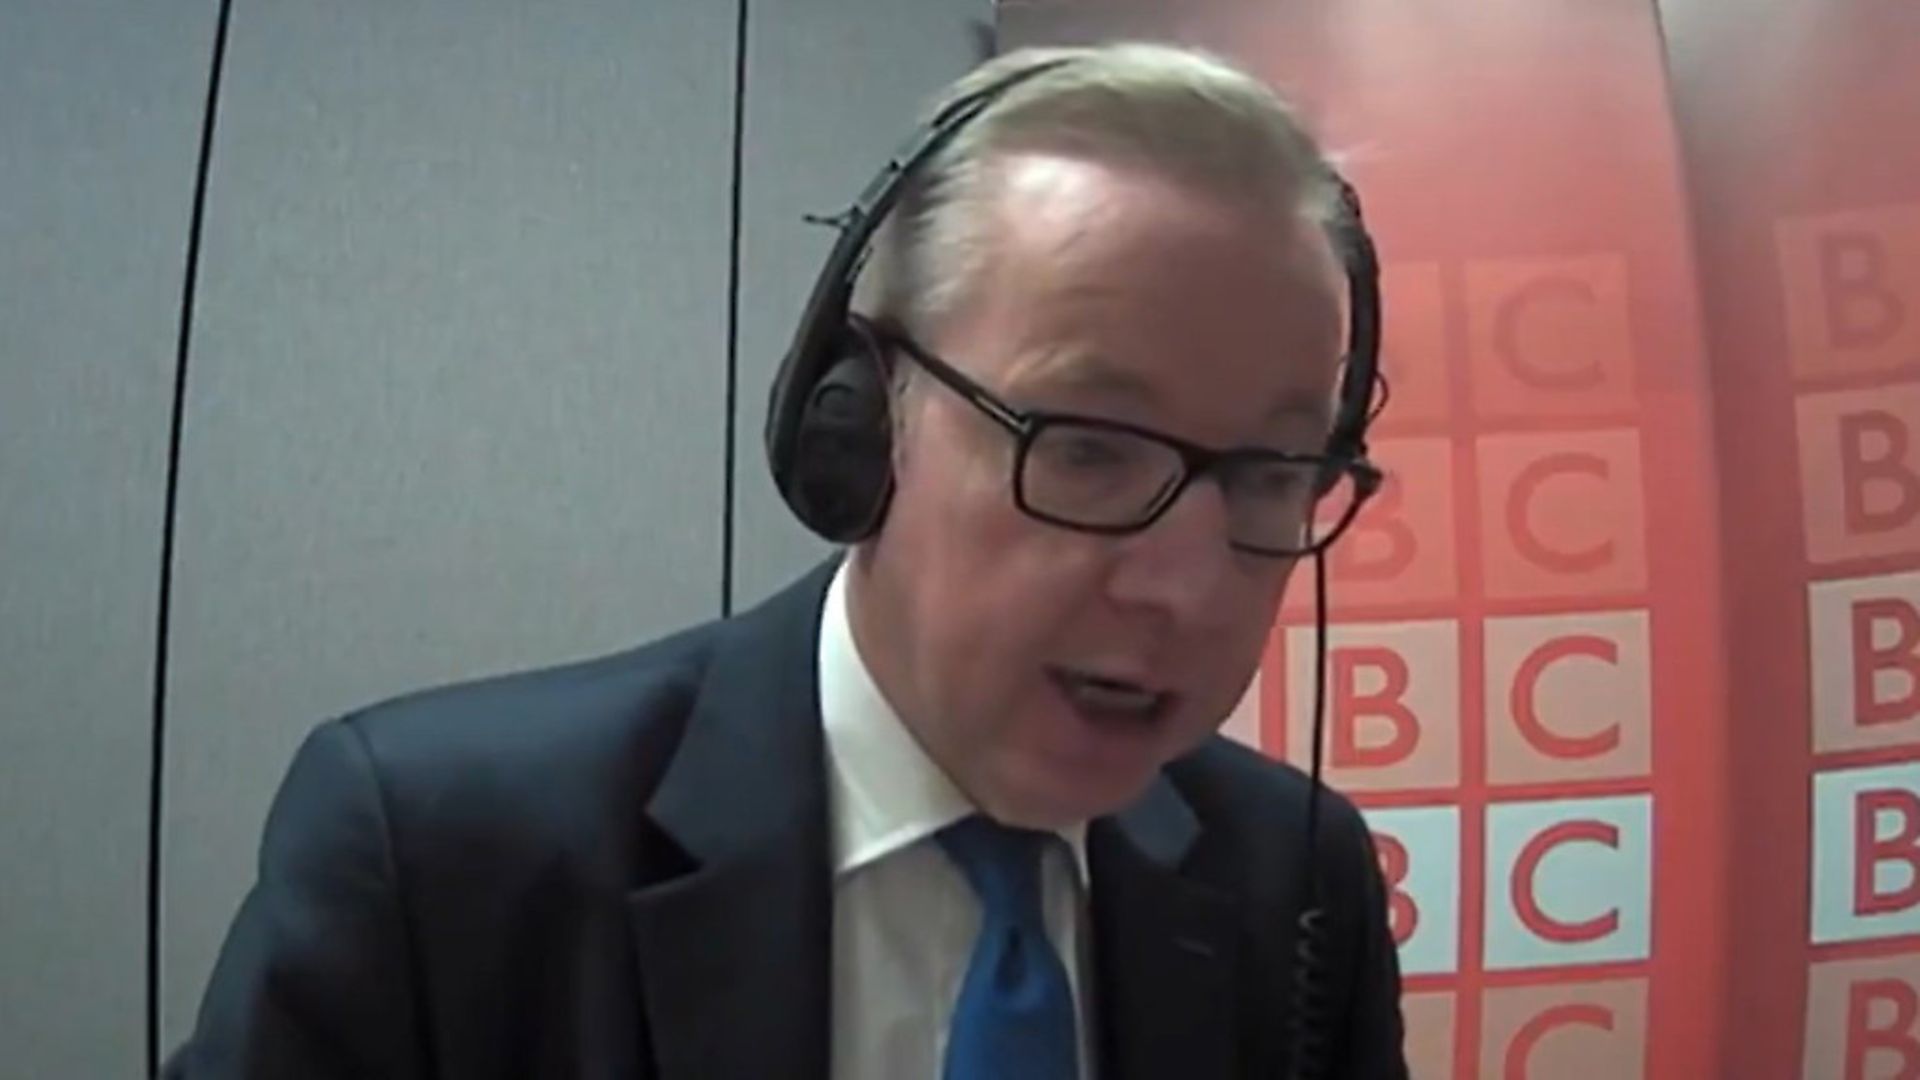 Michael Gove caused a glut of calls to Downing Street after he asked people to call in if they wanted to know why the prime minister isn't facing up to the Andrew Neil interview. Picture: BBC - Credit: BBC